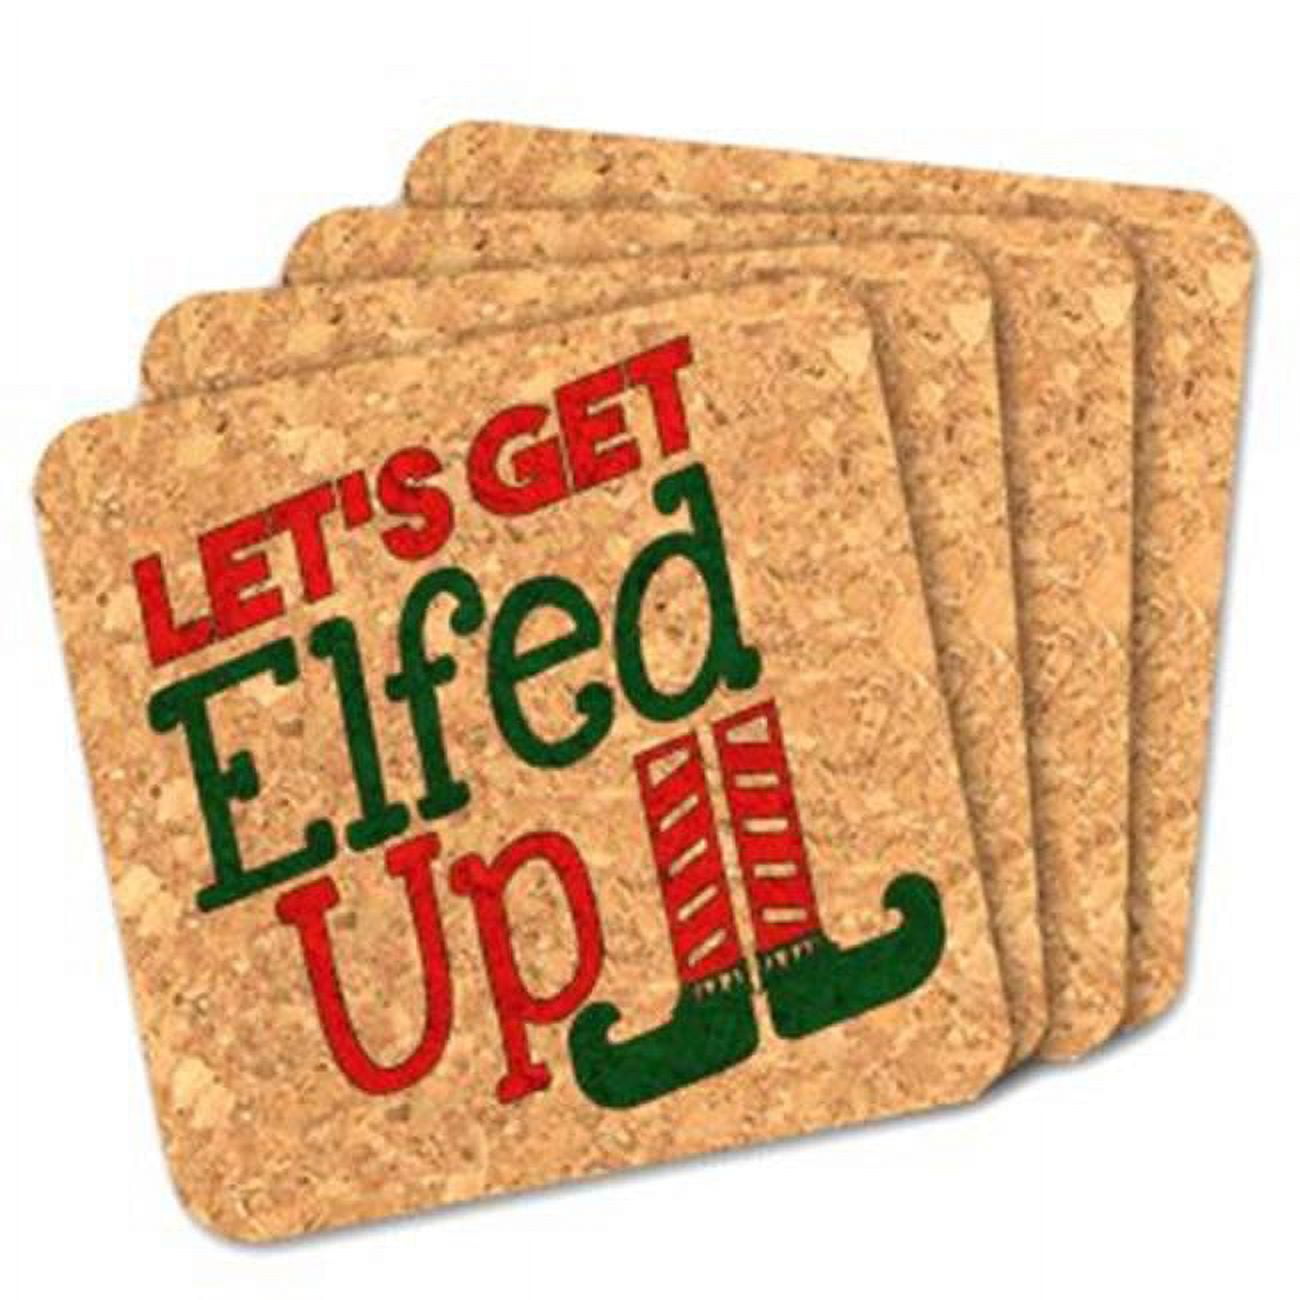 8407244 4 X 4 In. Lets Get Elfed Up Square Cork Coasters - Set Of 4